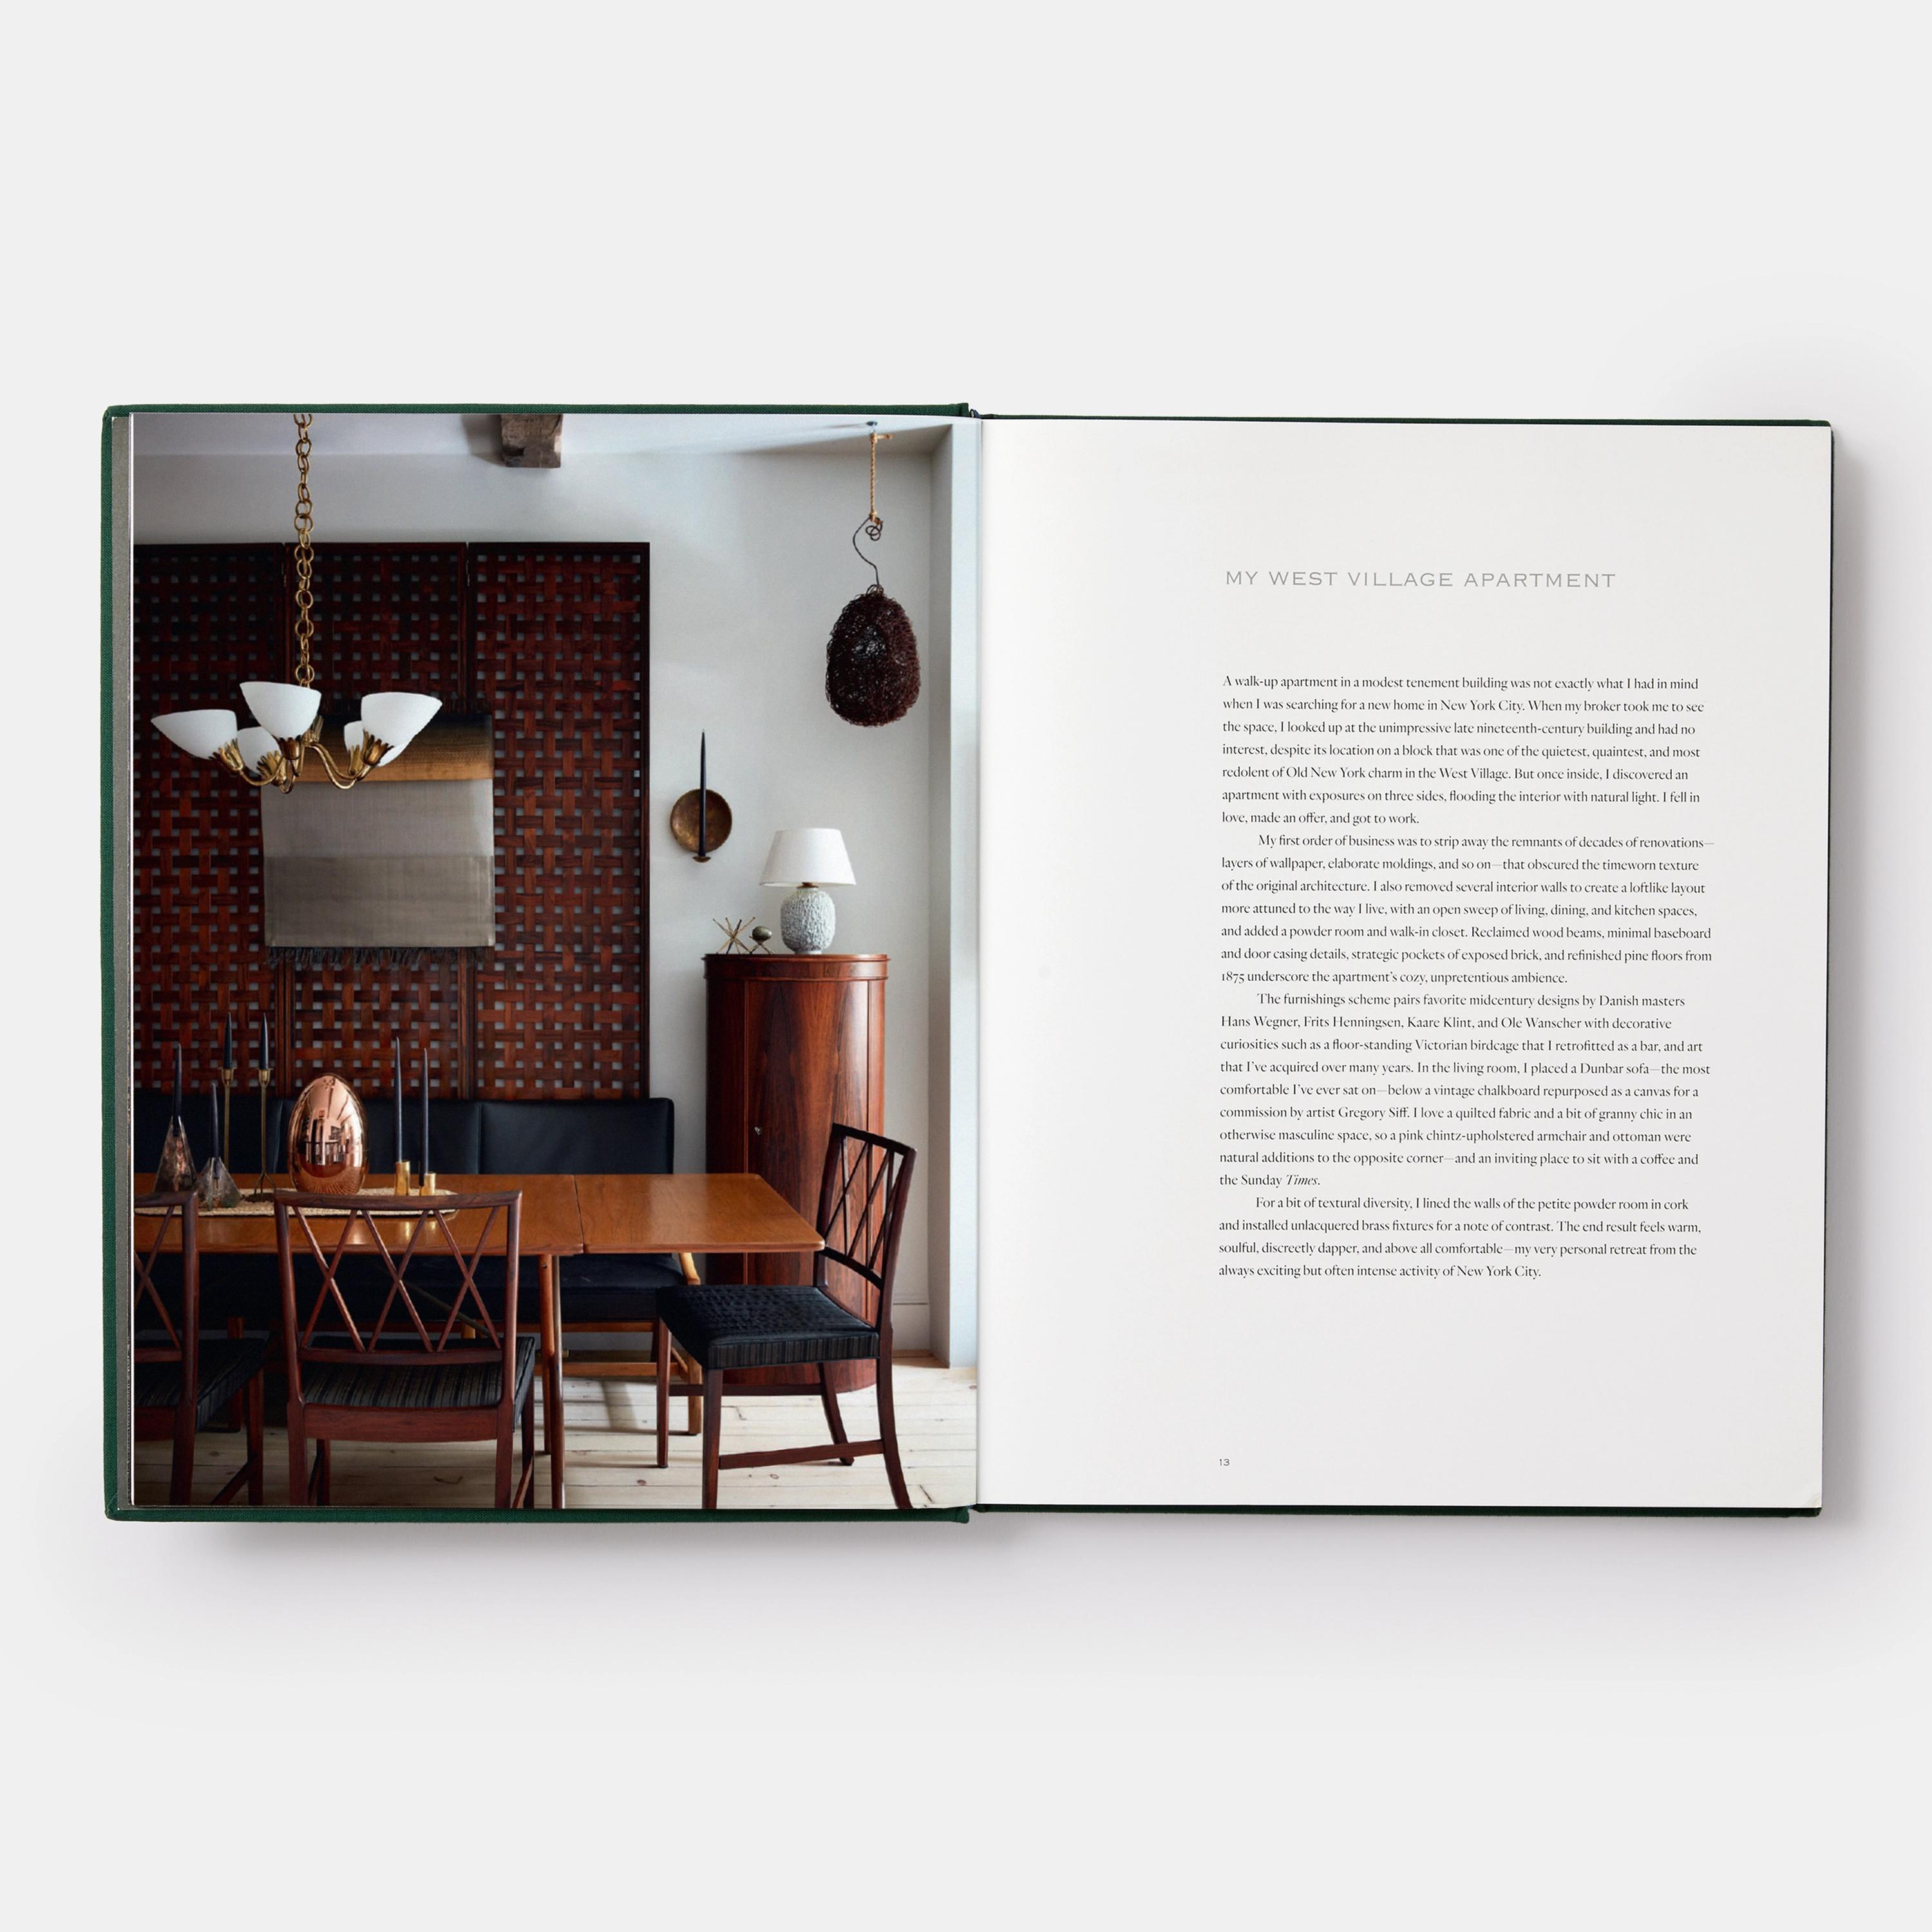 The First Monograph of Highly Sought-after Interior Designer Shawn Henderson, Who is Renowned for His Serene And Sophisticated Interiors.

Collecting fourteen stunning projects by acclaimed interior designer Shawn Henderson, this monograph